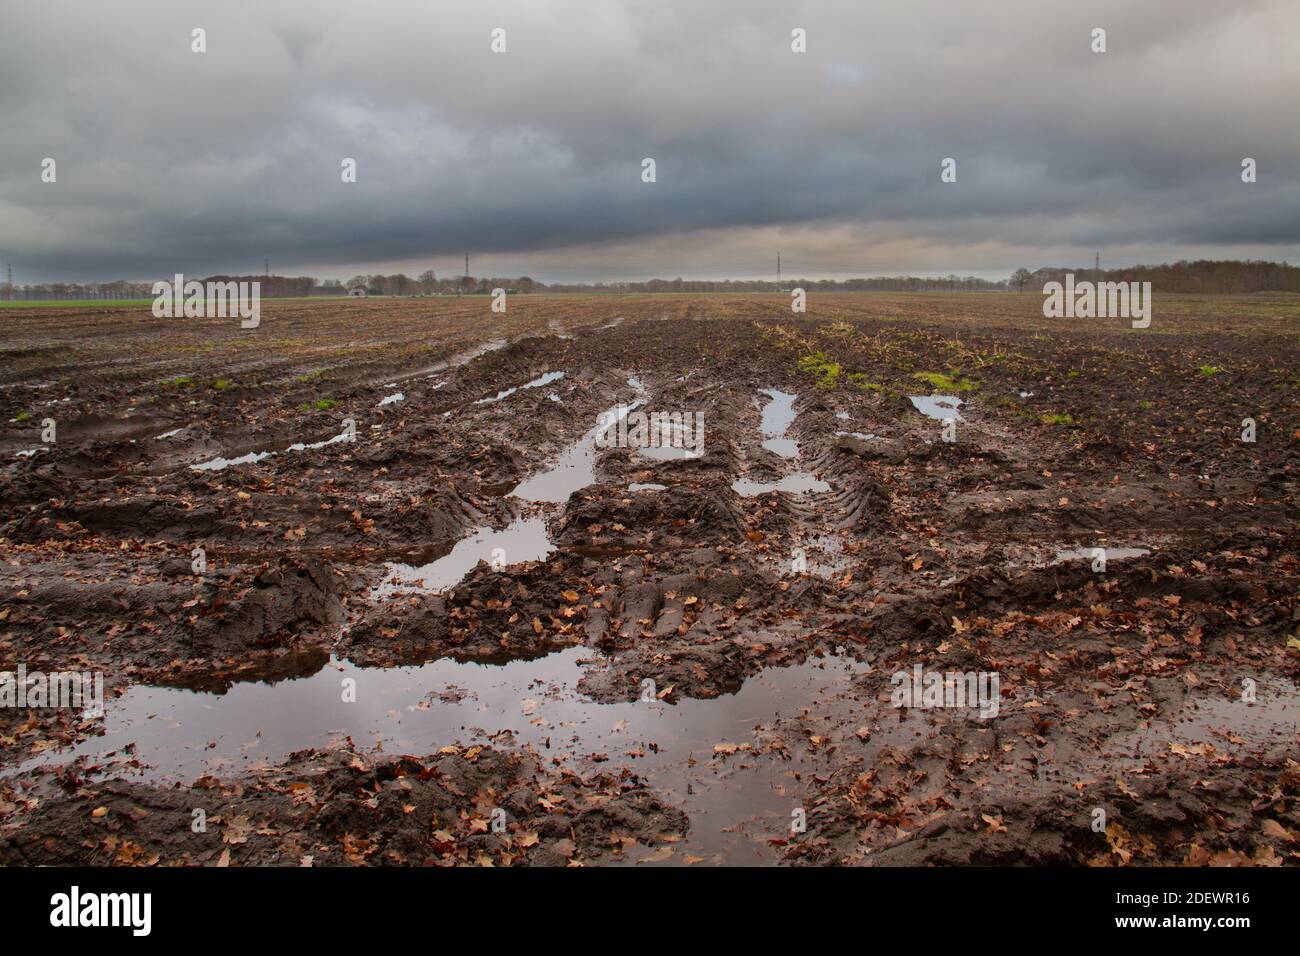 Potato field after harvest in autumn: puddles in tyre tracks under dark clouds Stock Photo